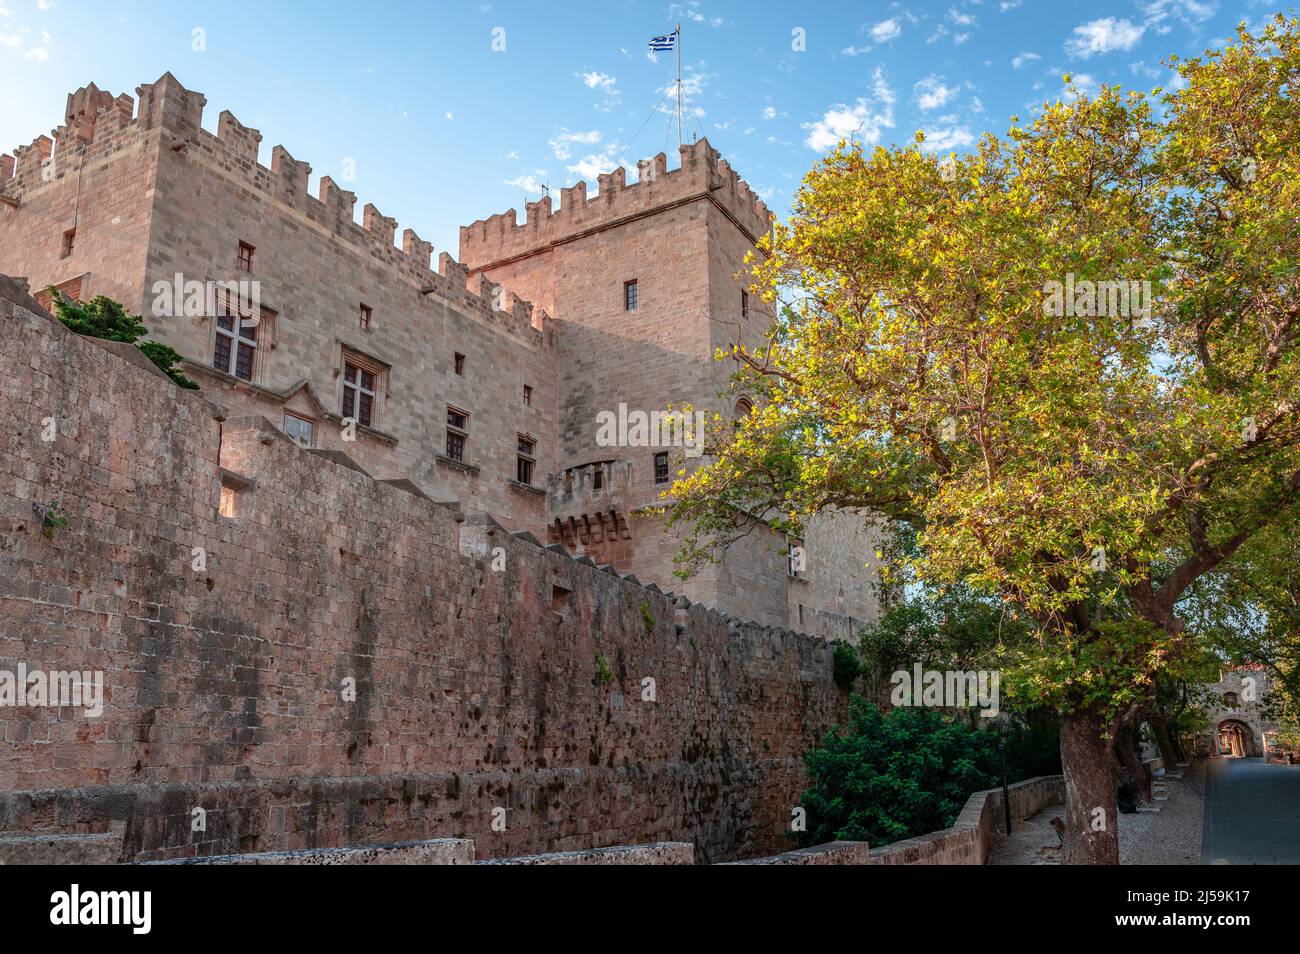 The Palace of the Grand Master of the Knights of Rhodes in the medieval city of Rhodes, Greece. Stock Photo